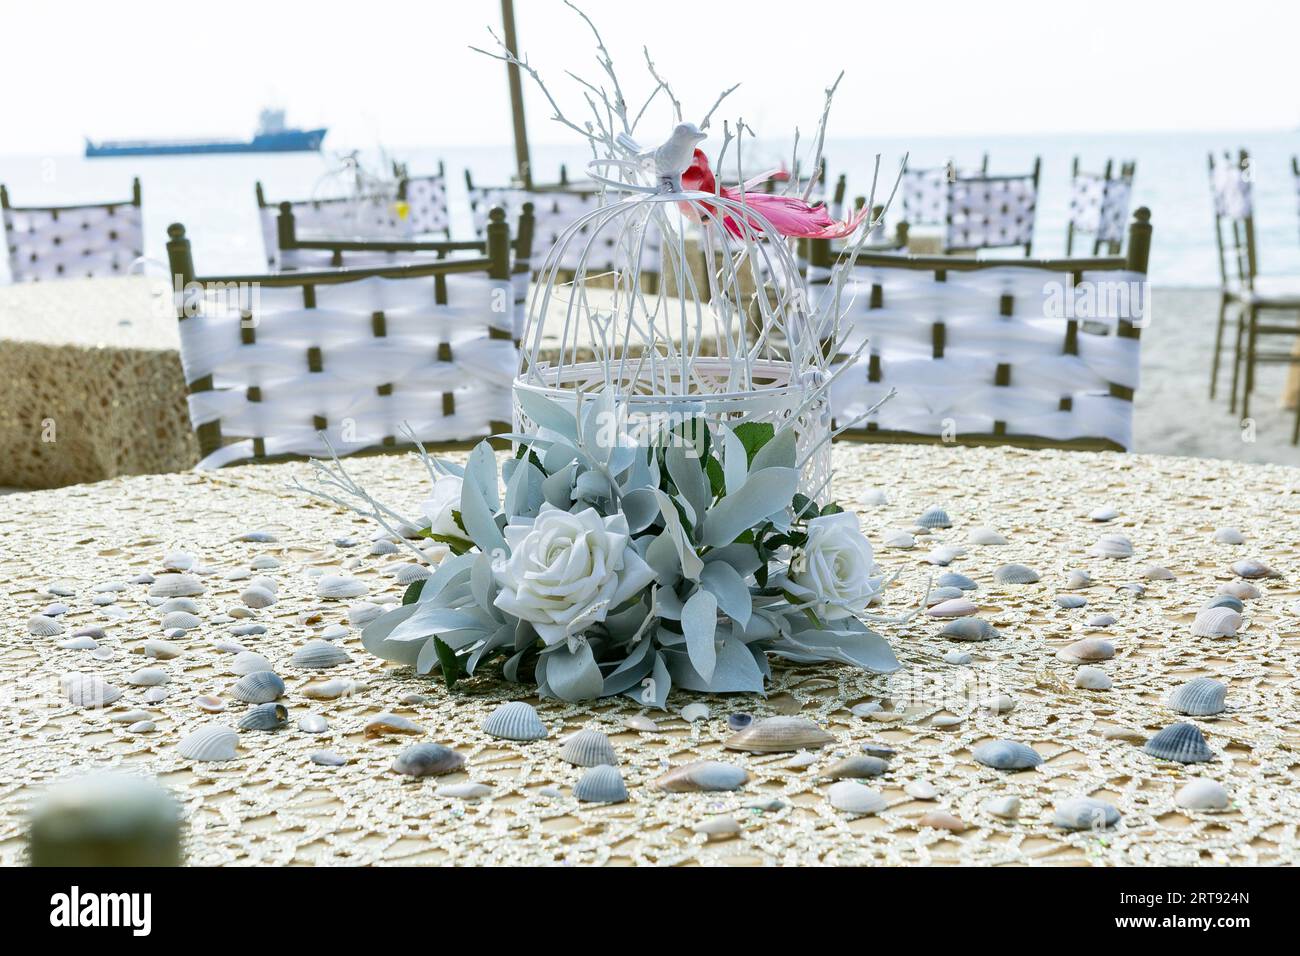 Decorated Tables For Outdoor Reception By The Sea. Stock Photo